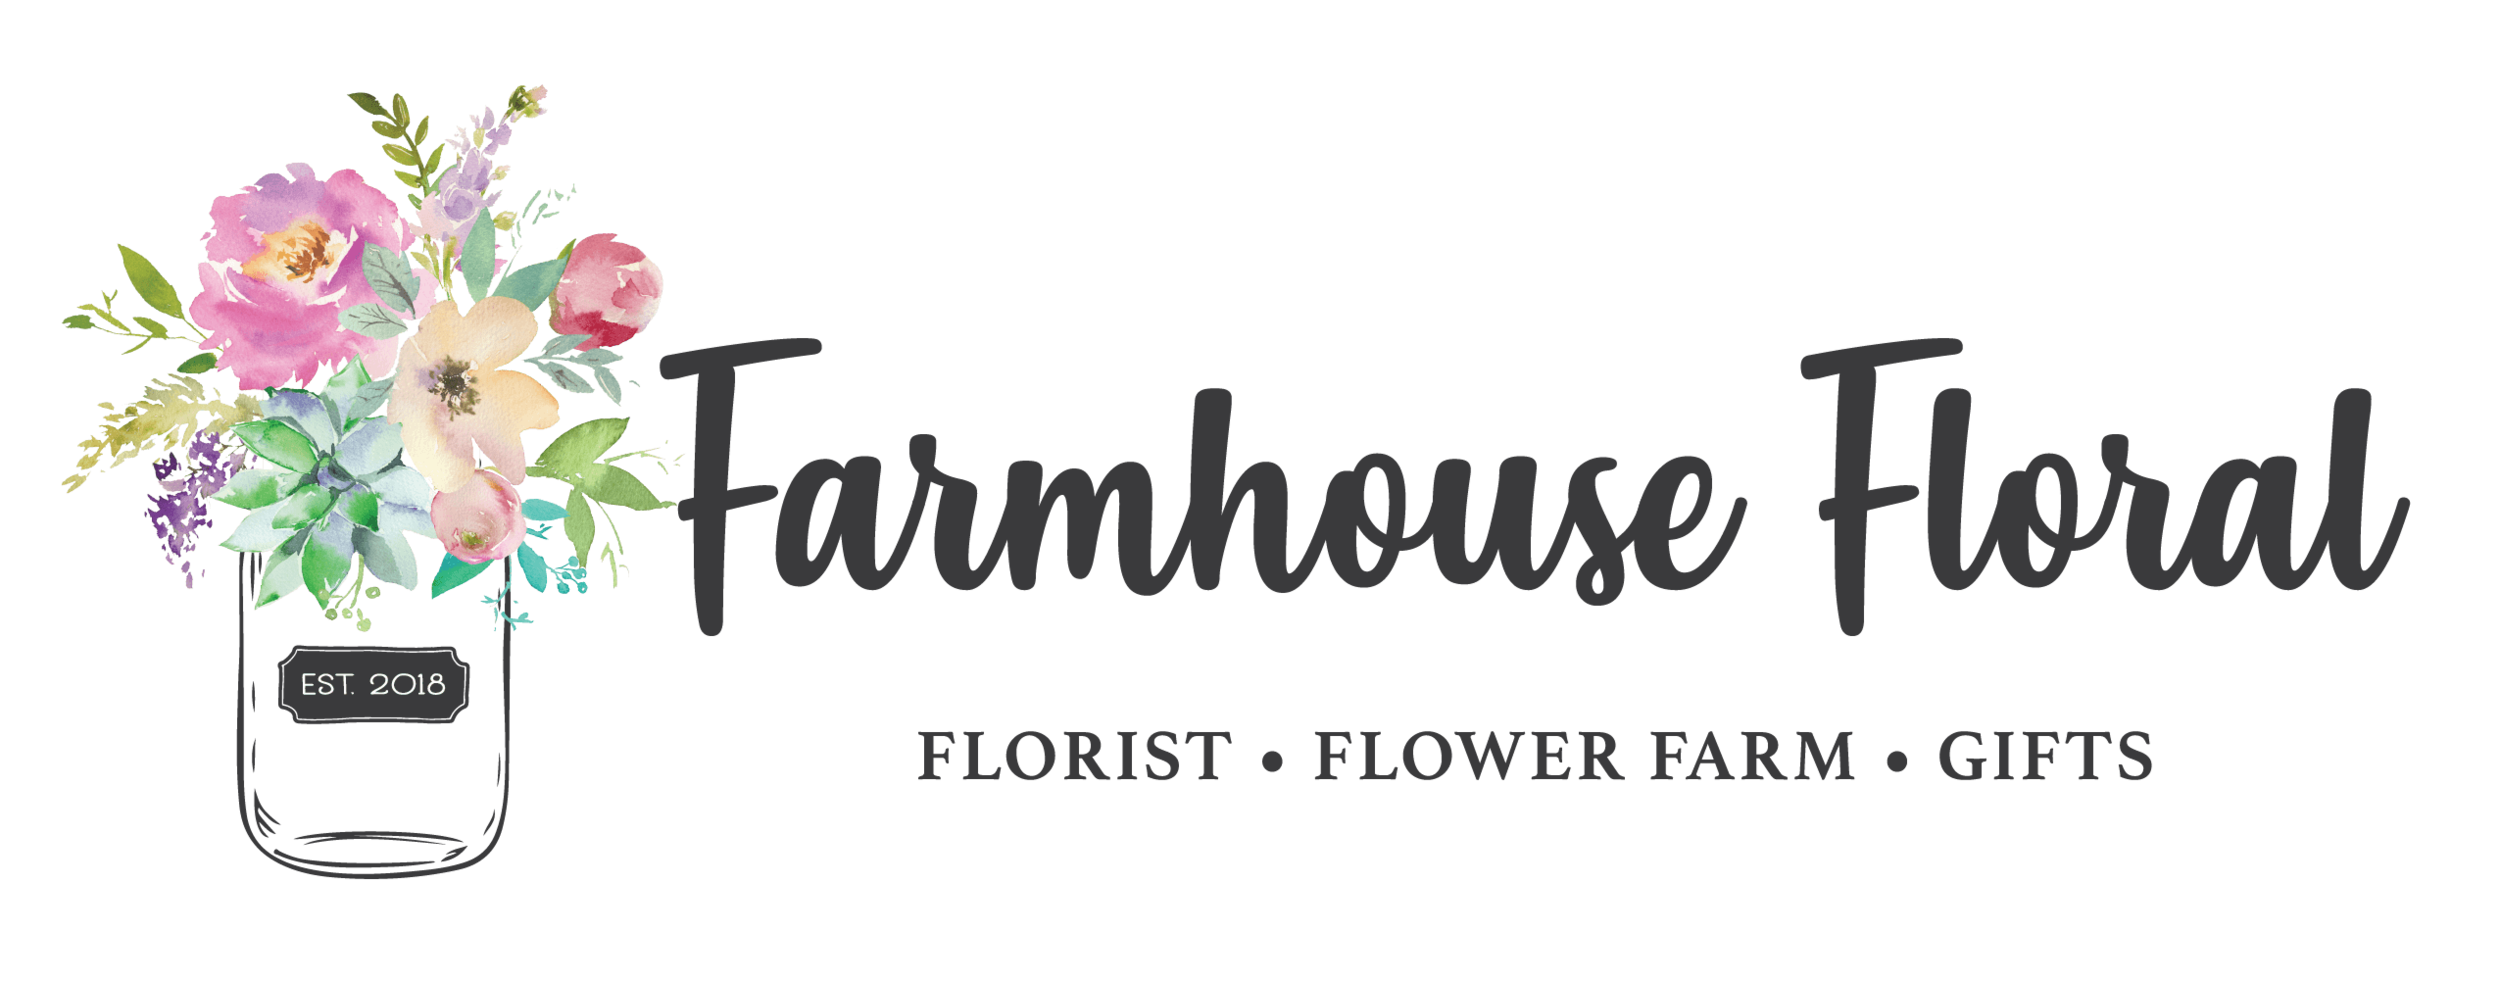 Farmhouse Floral &amp; Gifts